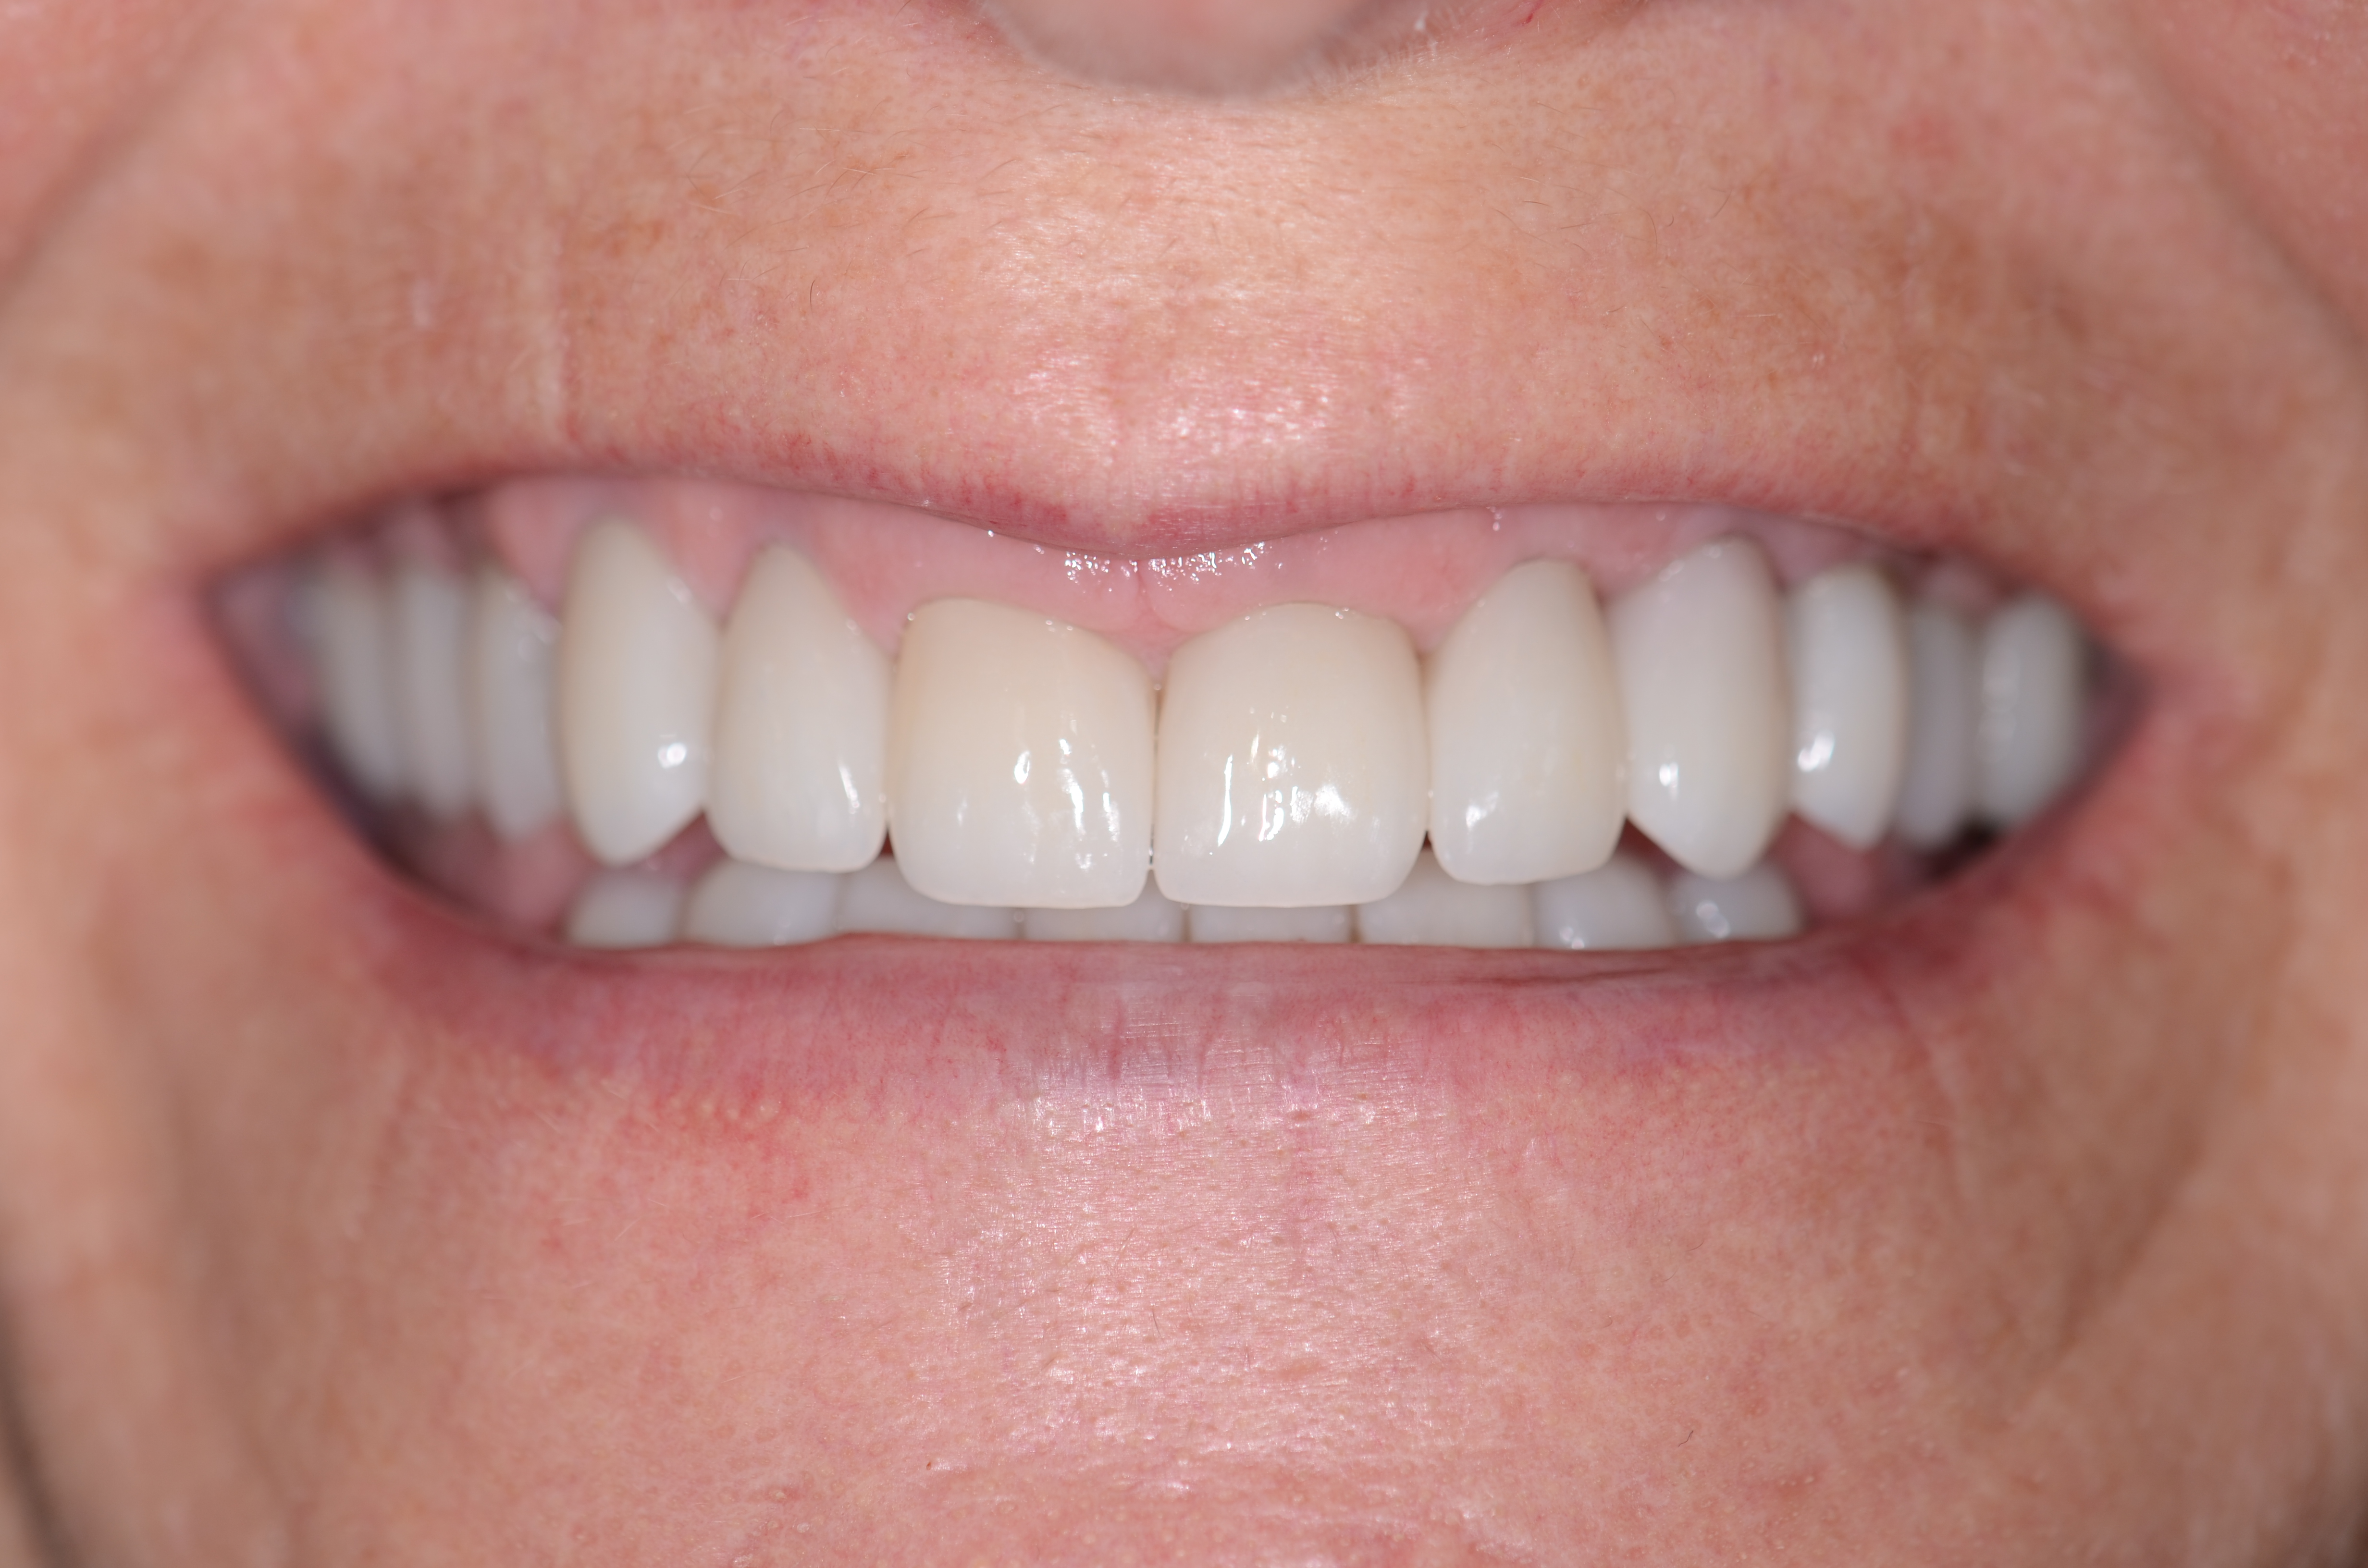 Patient case features full mouth restoration using All-Z Plus multi-layered translucent zirconia to closely replicate the esthetics of a natural tooth. | Pro-Craft